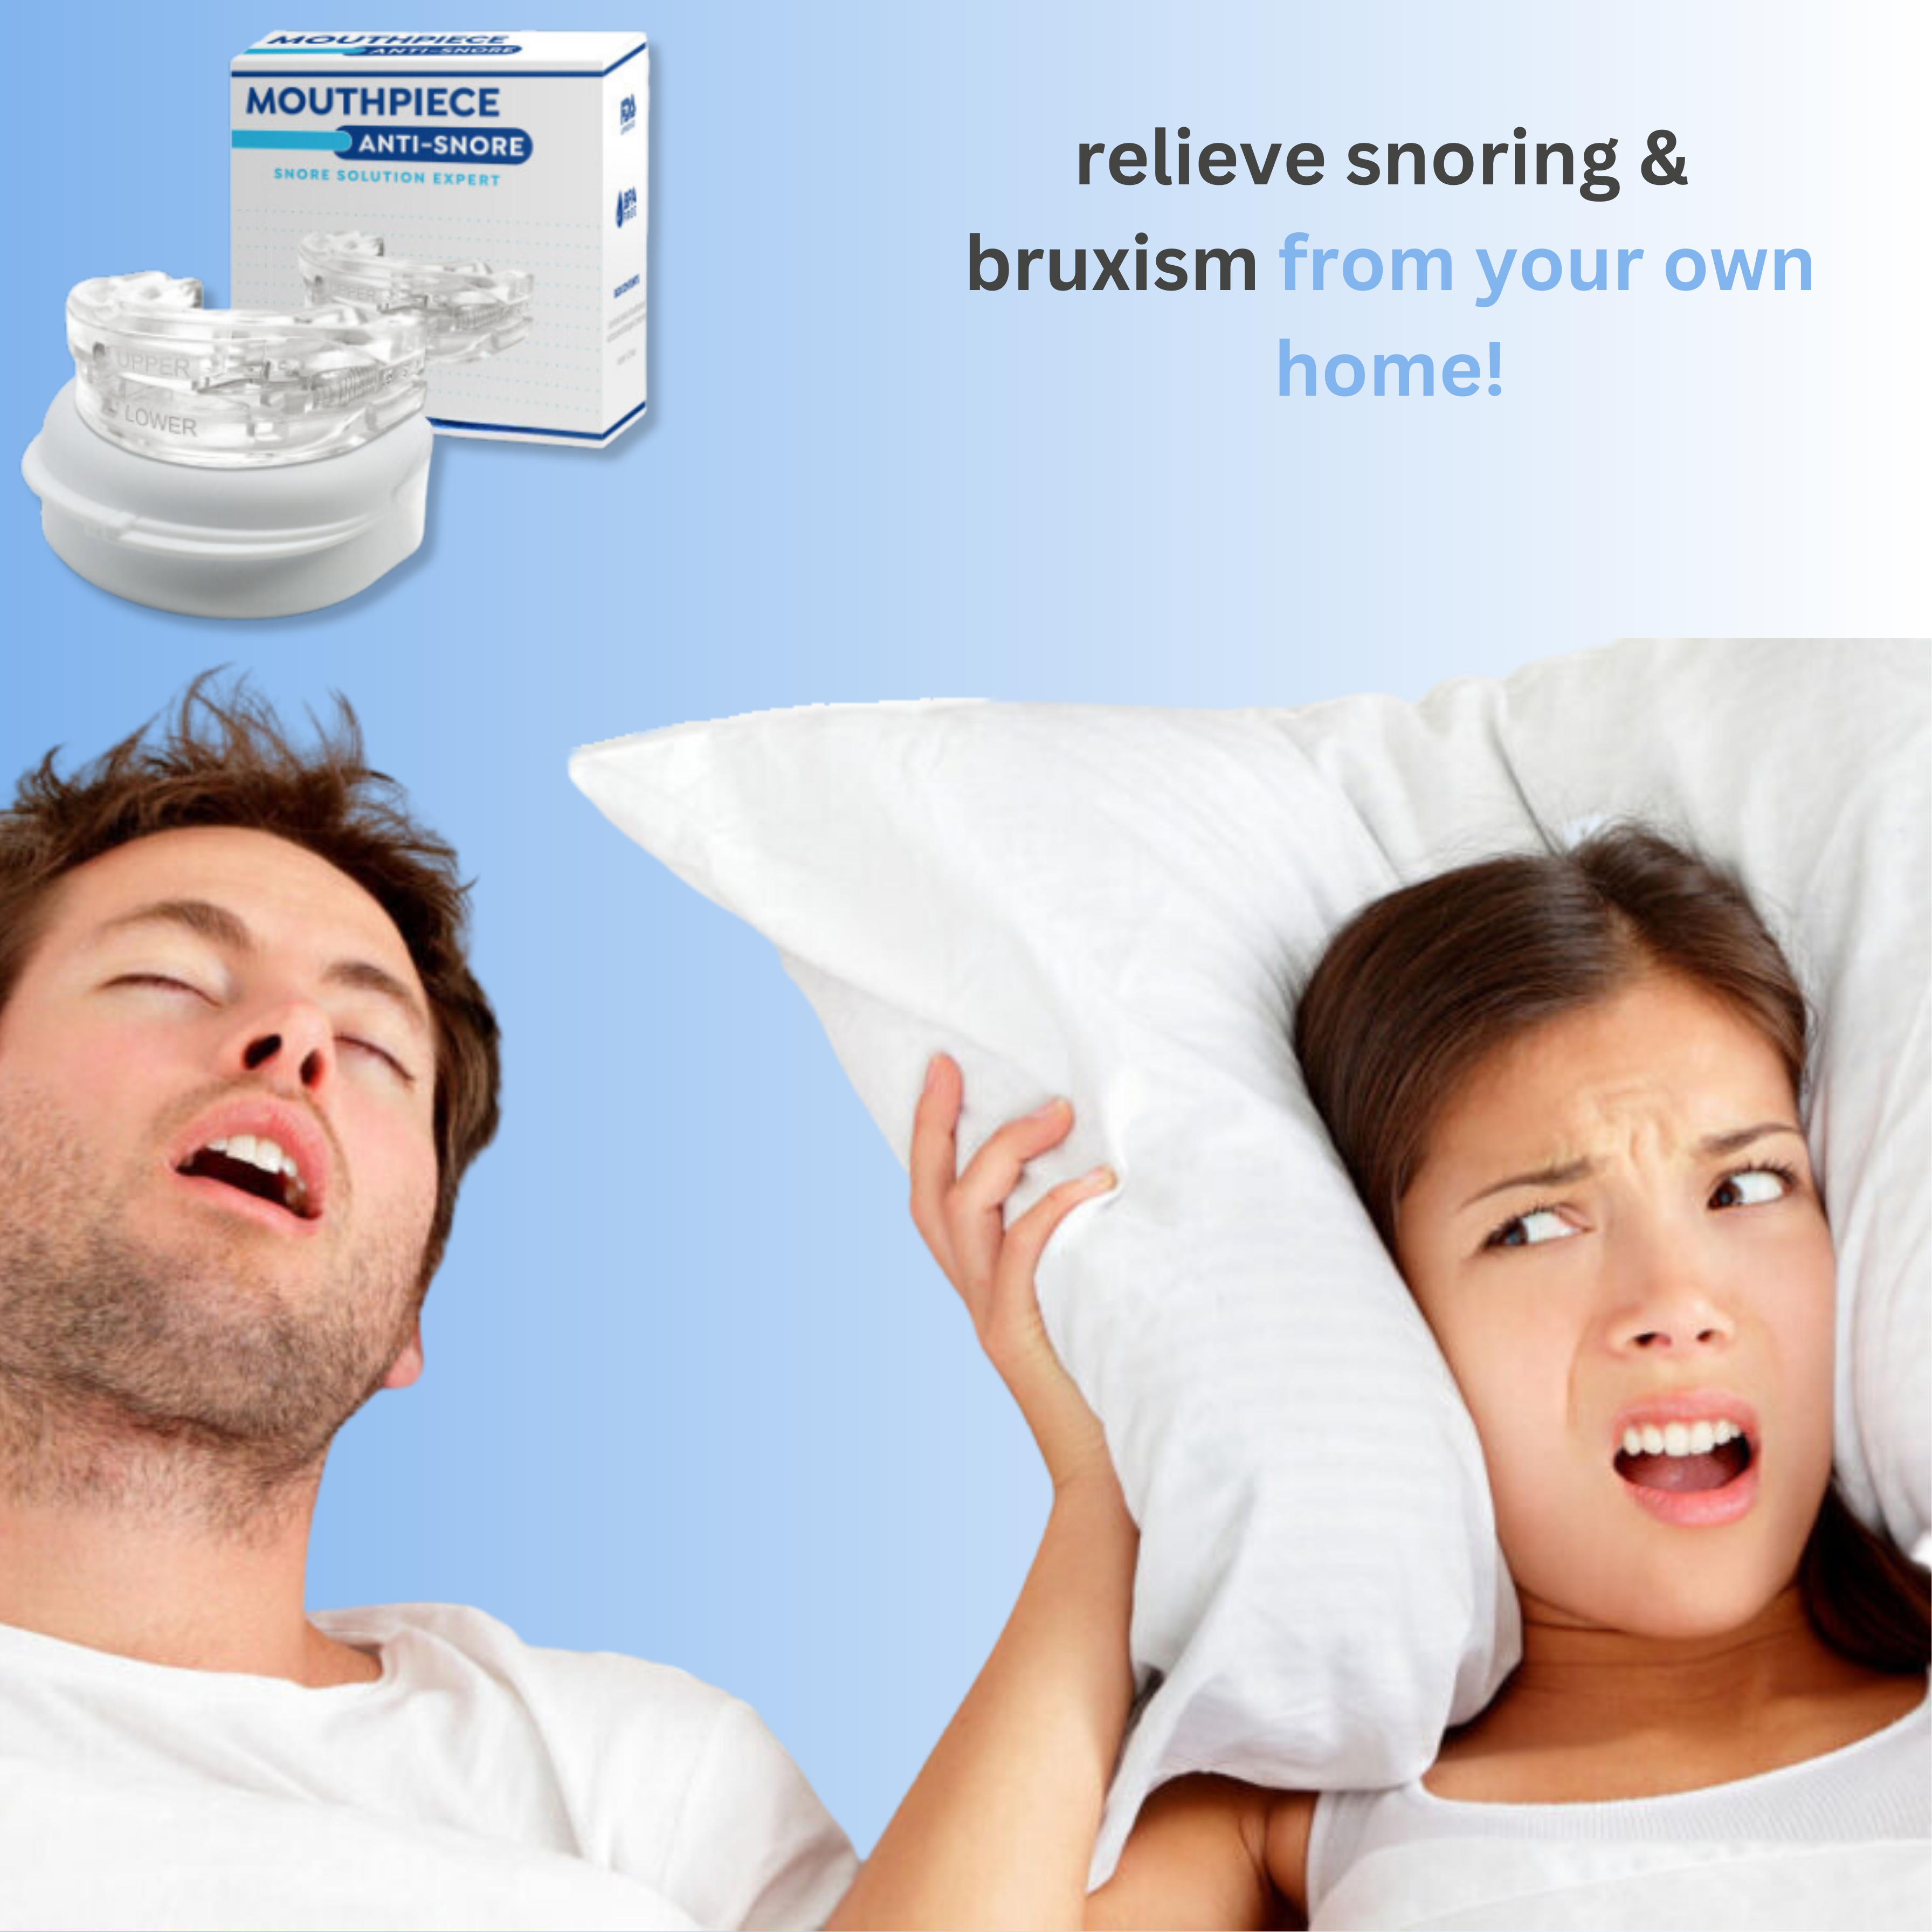 SleepWise - Snoring Prevention Aid